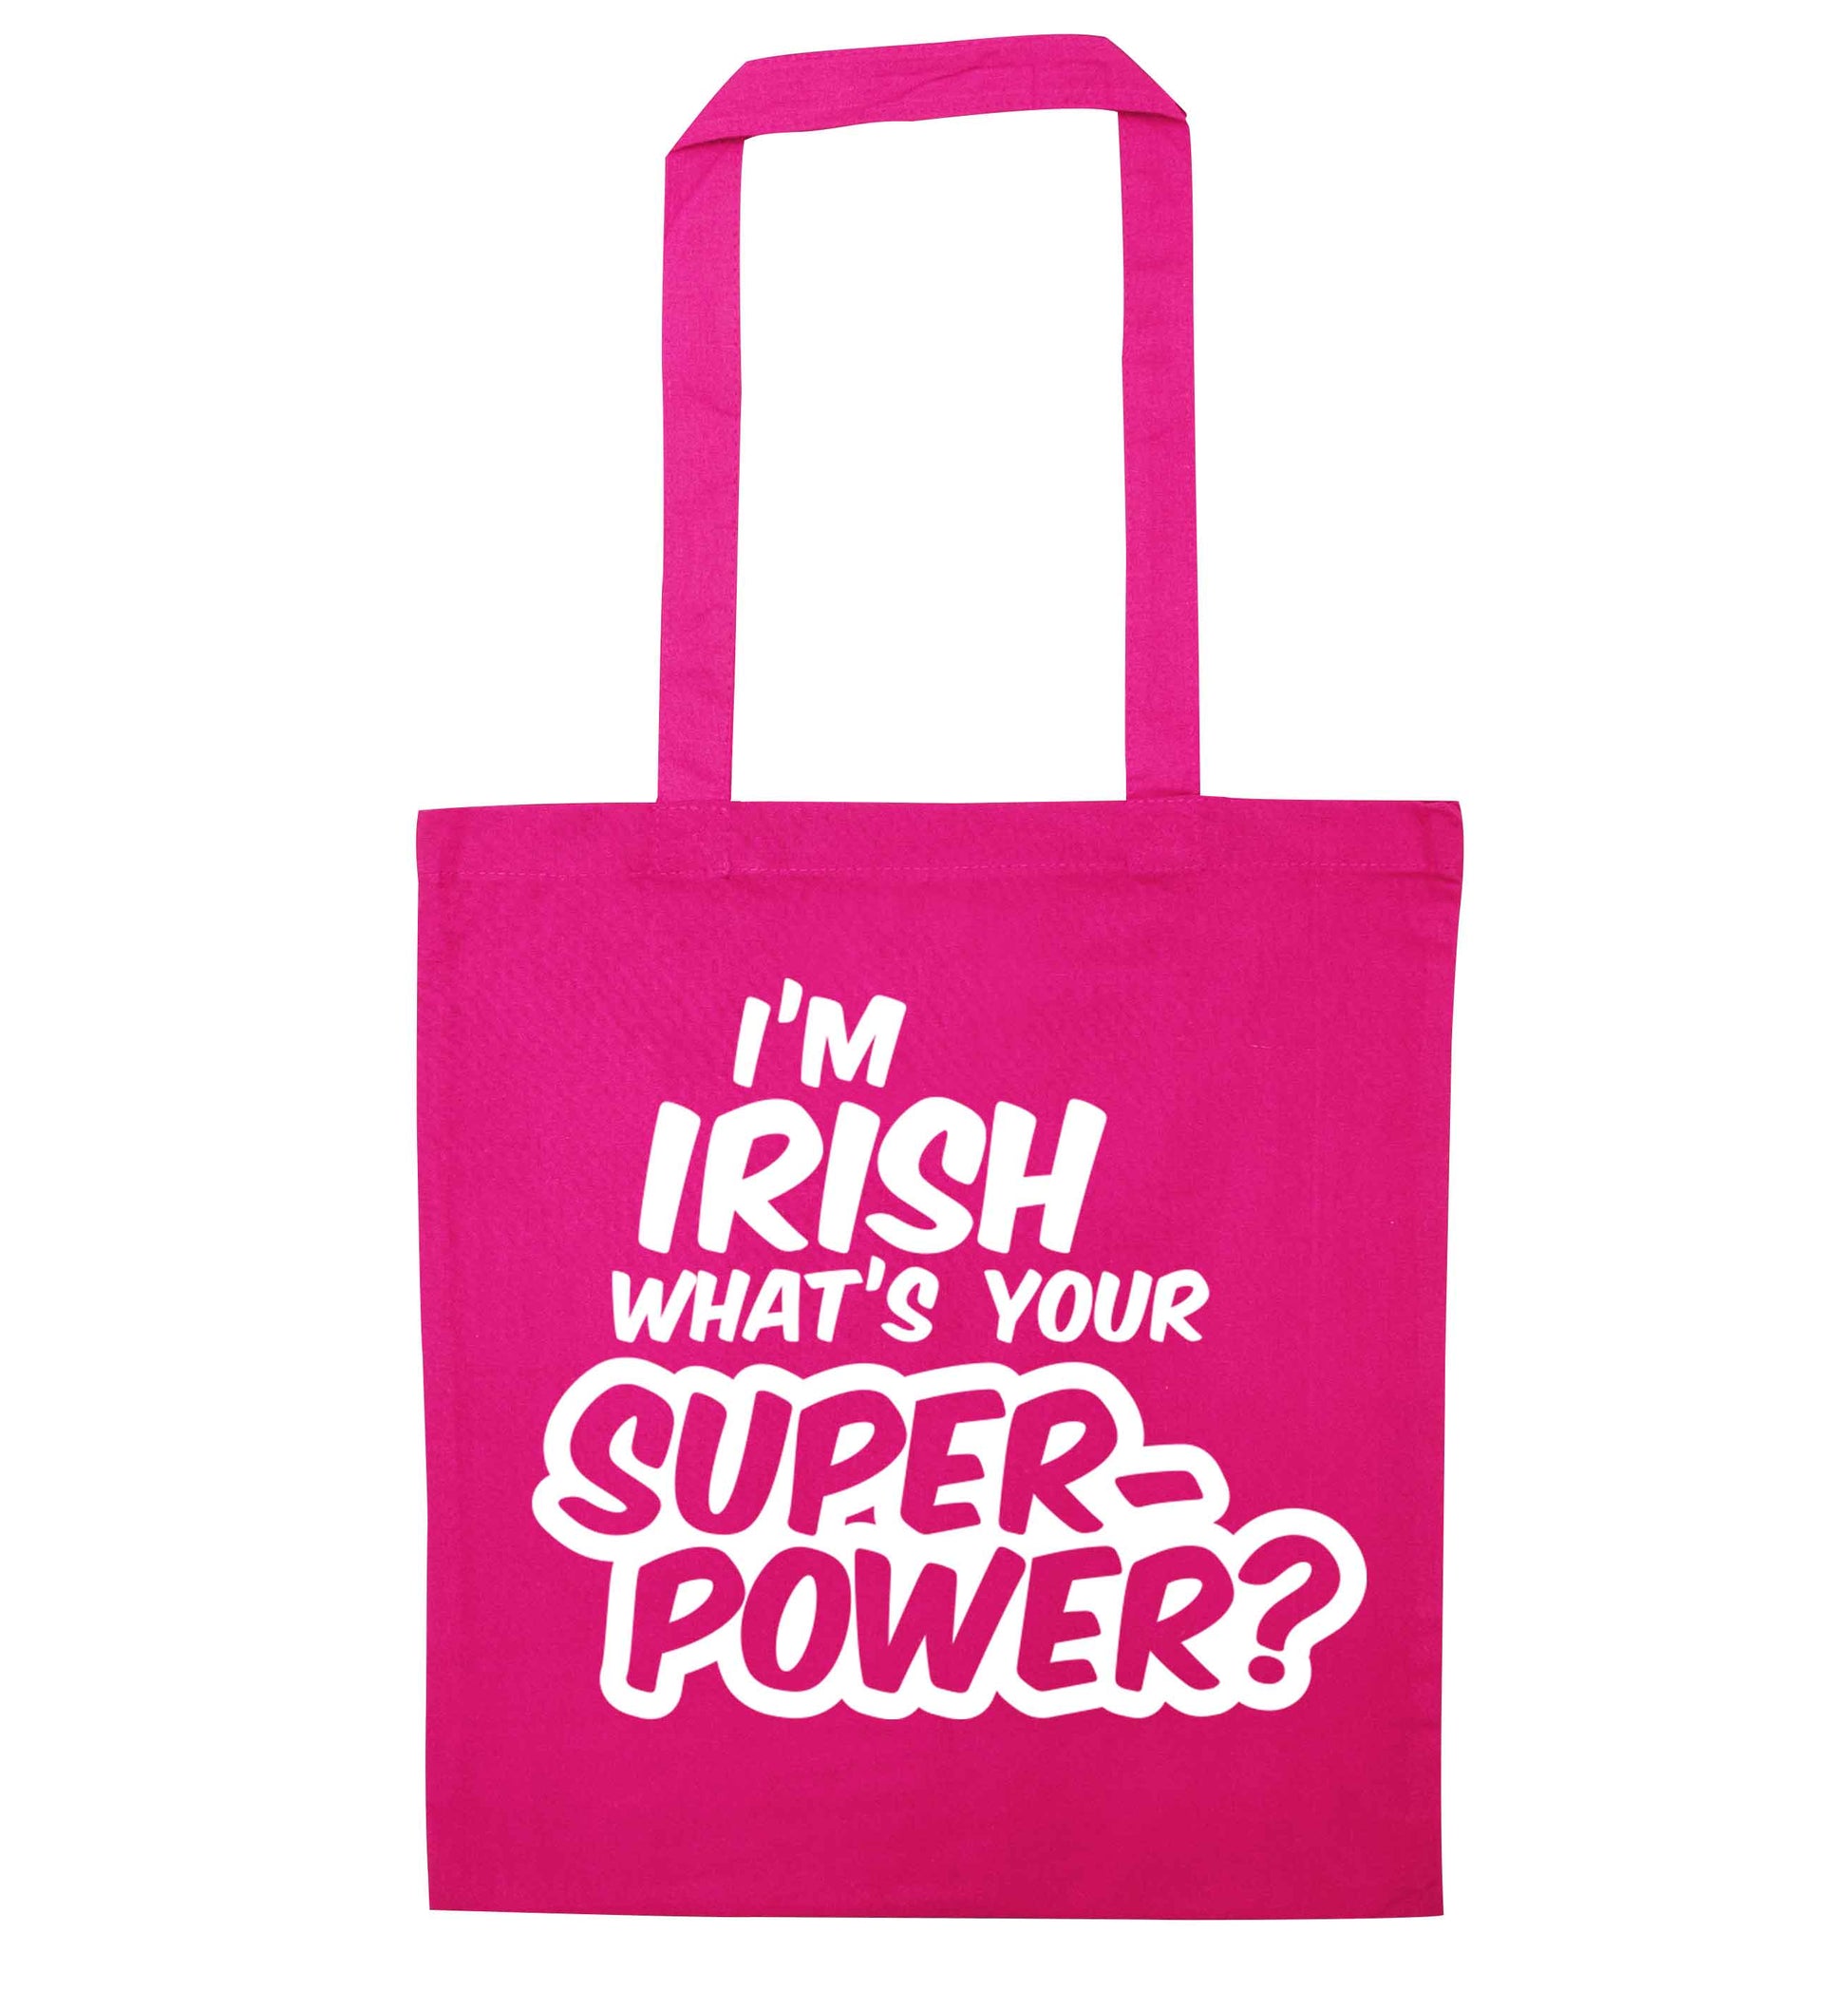 I'm Irish what's your superpower? pink tote bag